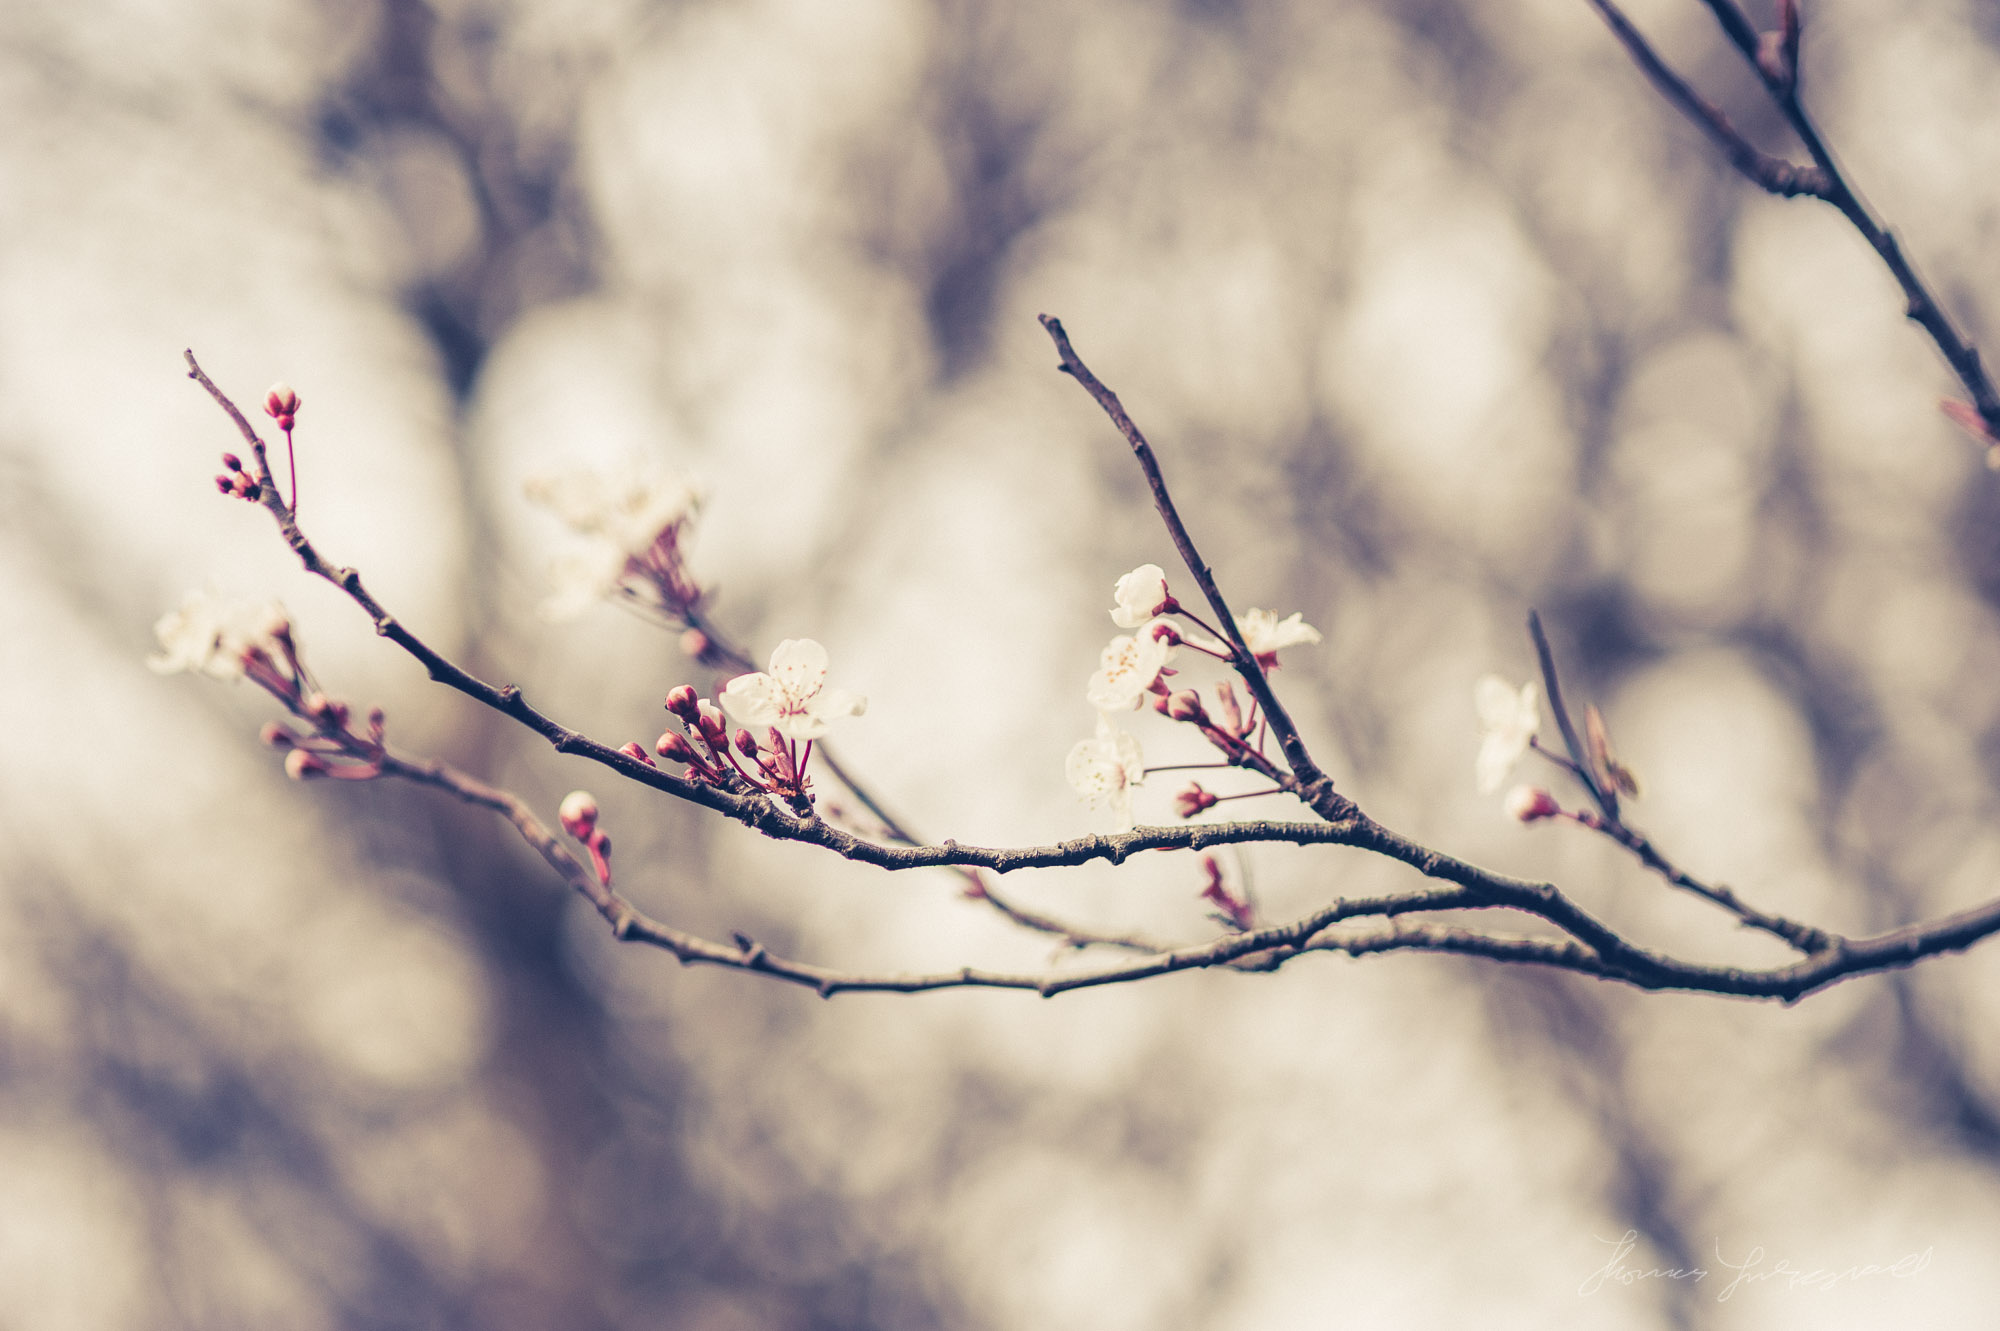 Cherry Blossom Buds beginning to Bloom - Graded with Film Candy for Lightroom